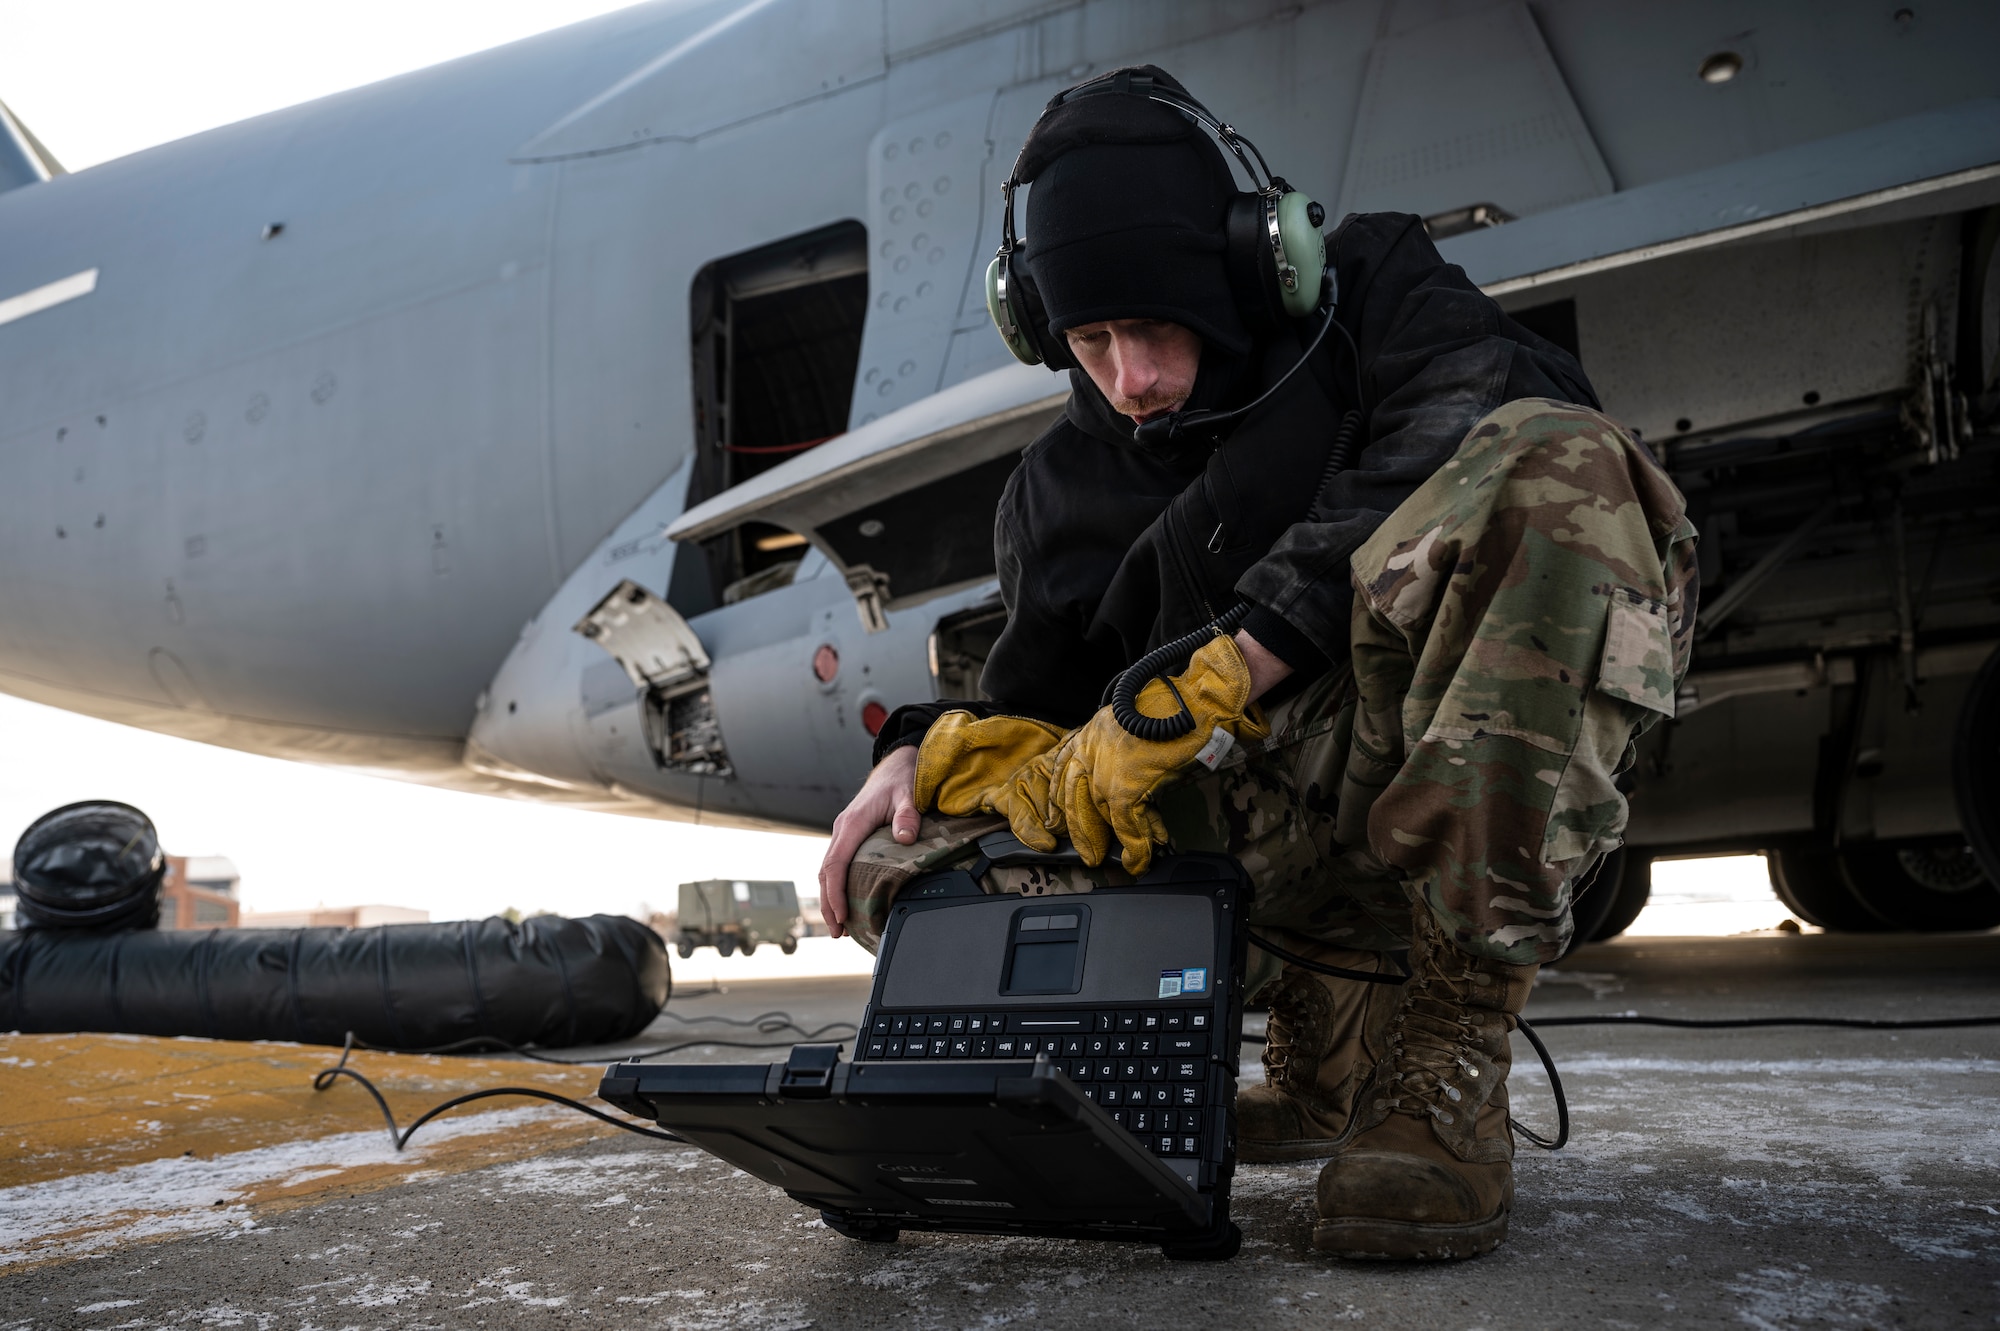 Master Sgt. John Thompson, 911th Aircraft Maintenance Squadron crew chief, reads a technical order while preparing to change a tire on a C-17 Globemaster III at the Pittsburgh International Airport Air Reserve Station, Pennsylvania, Jan. 11, 2022.